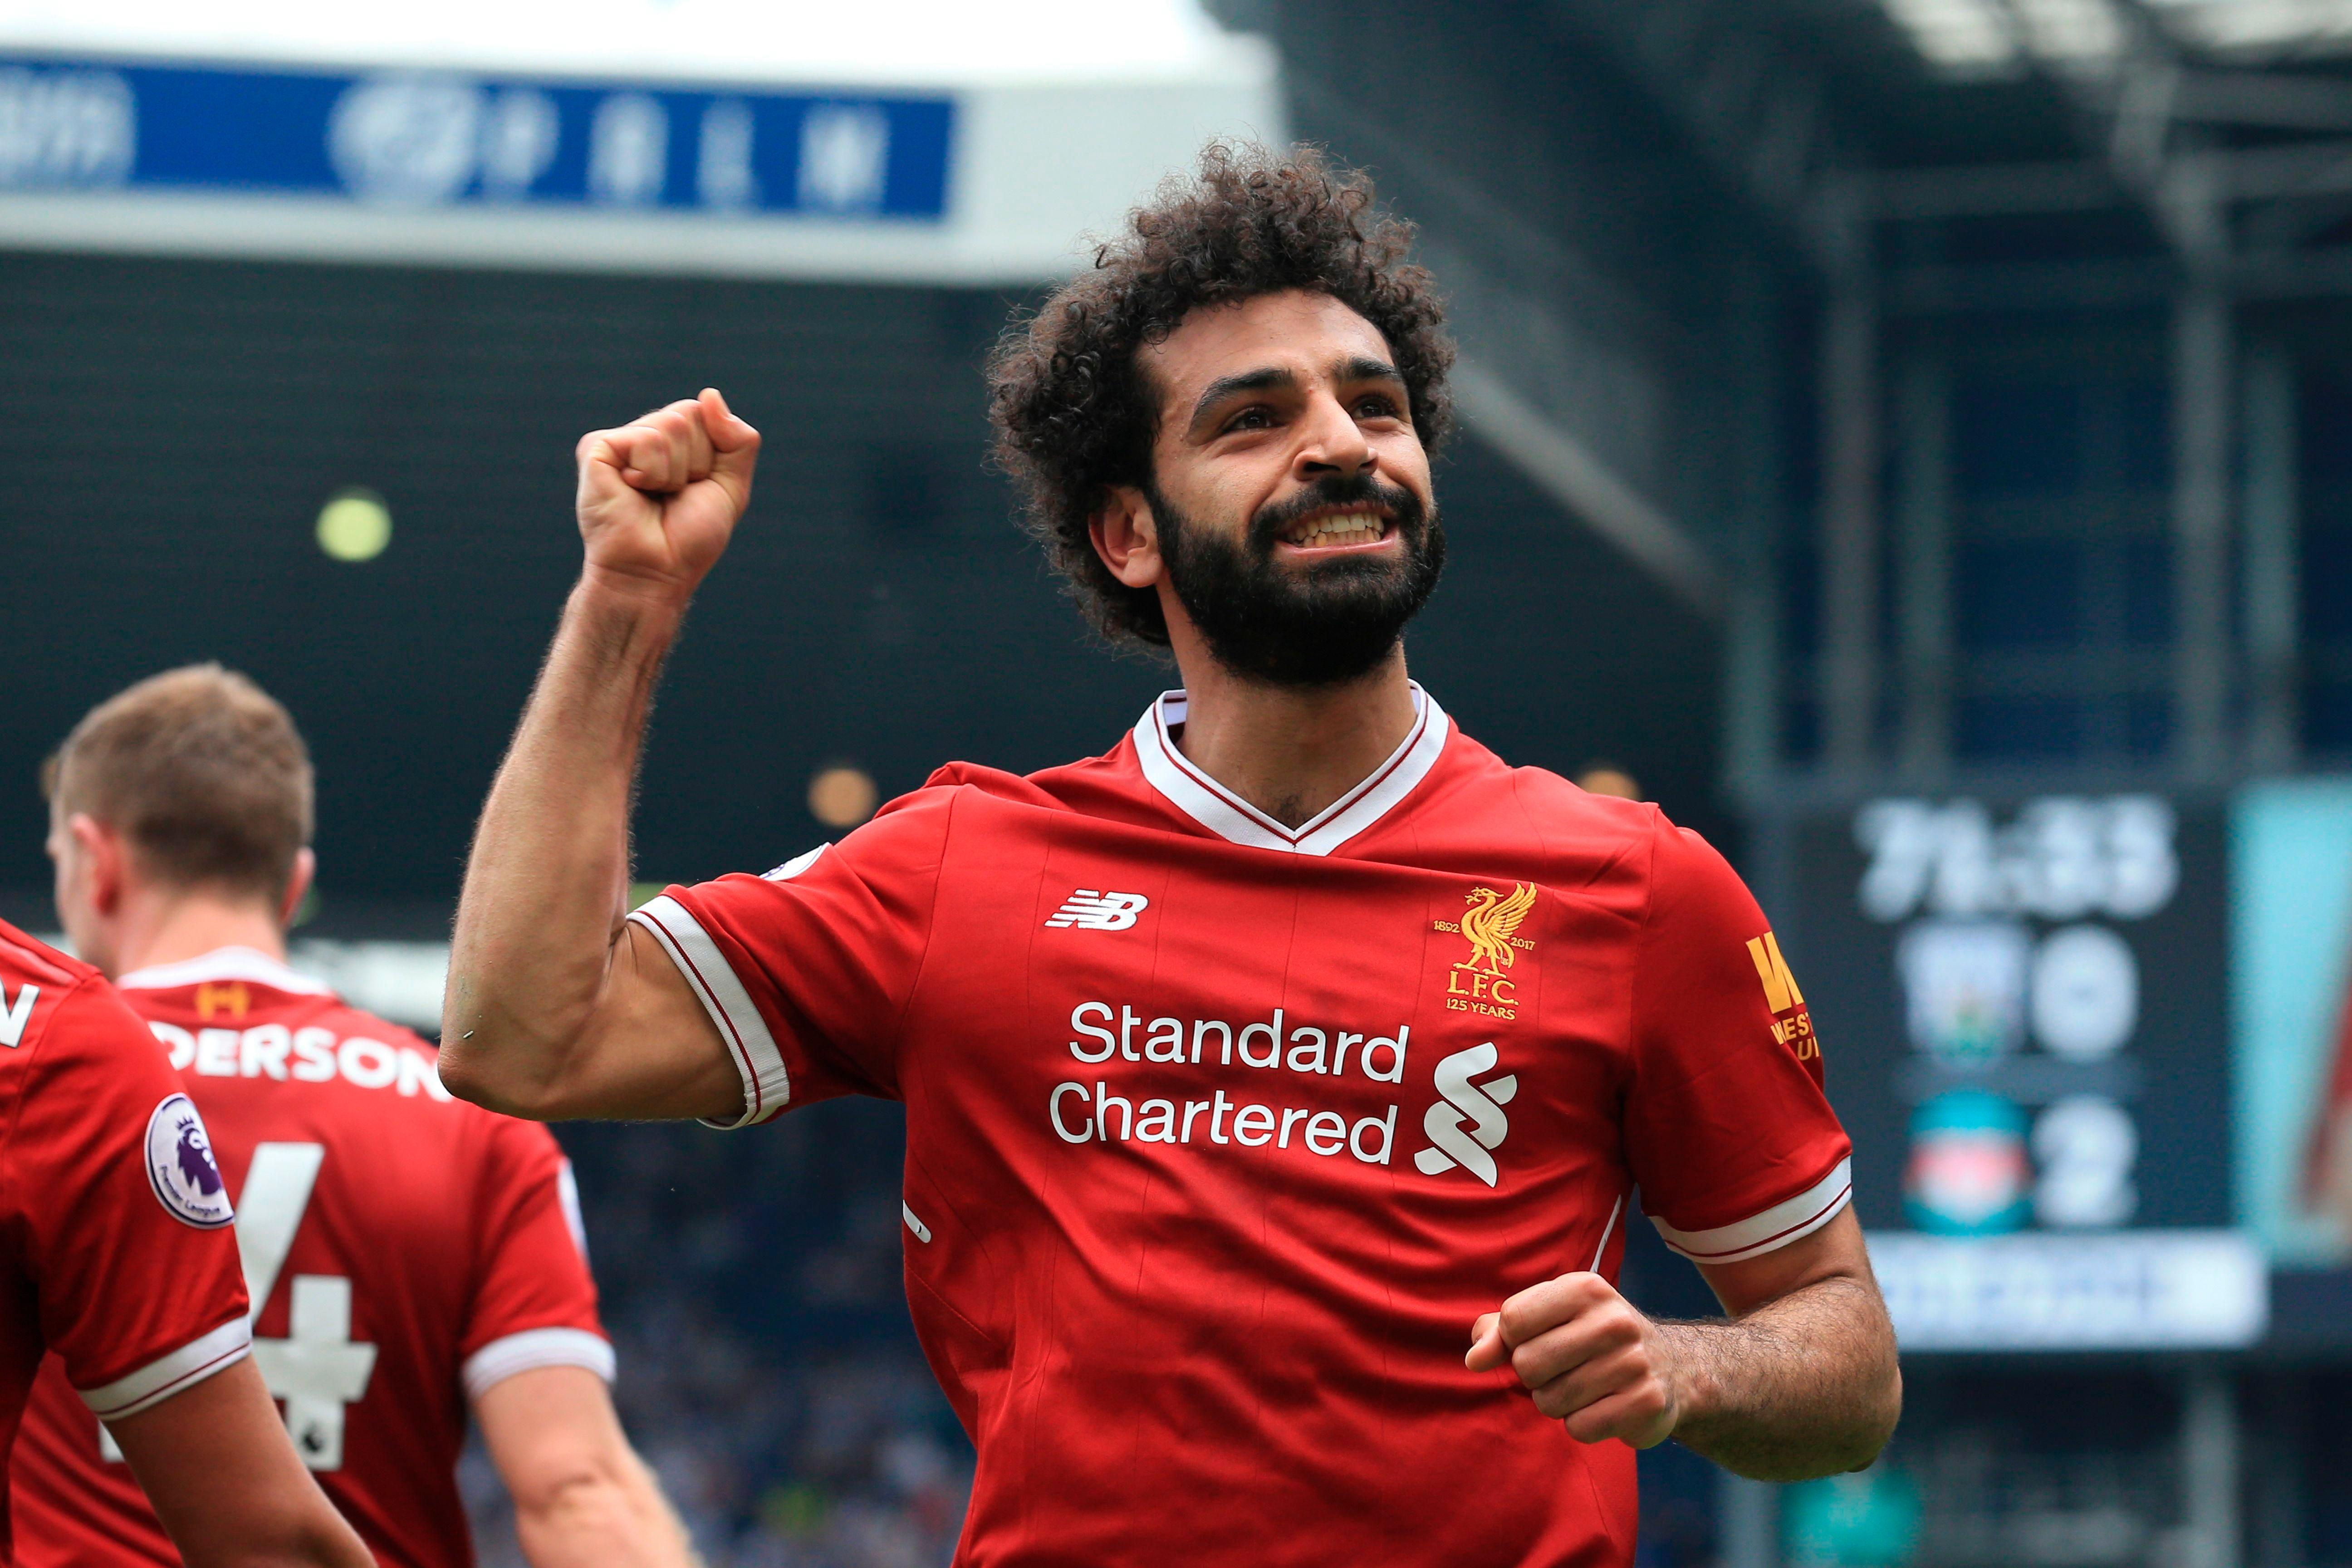 'I literally had tears' - Liverpool fans react to Mohamed Salah's new five-year contract